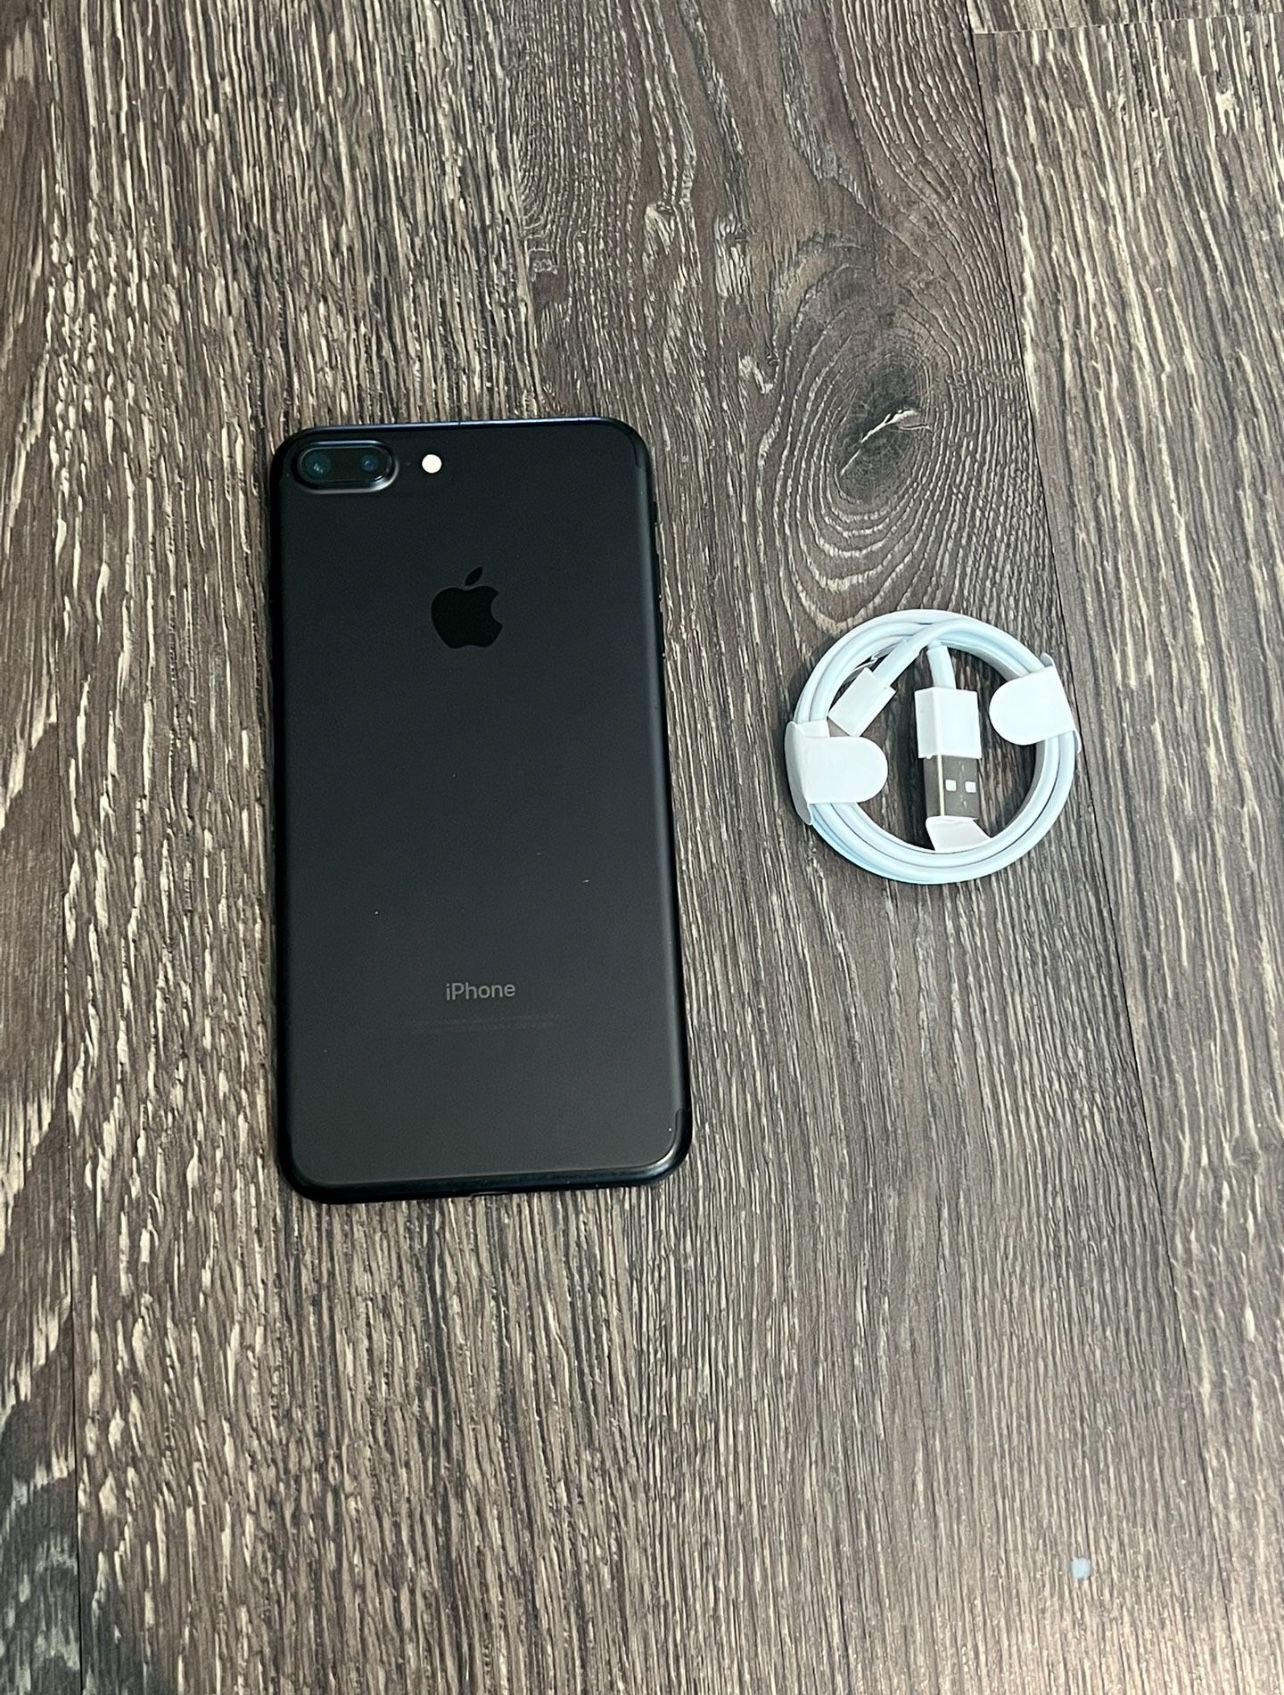 iPhone 7 Plus 128gb UNLOCKED FOR ANY CARRIER!